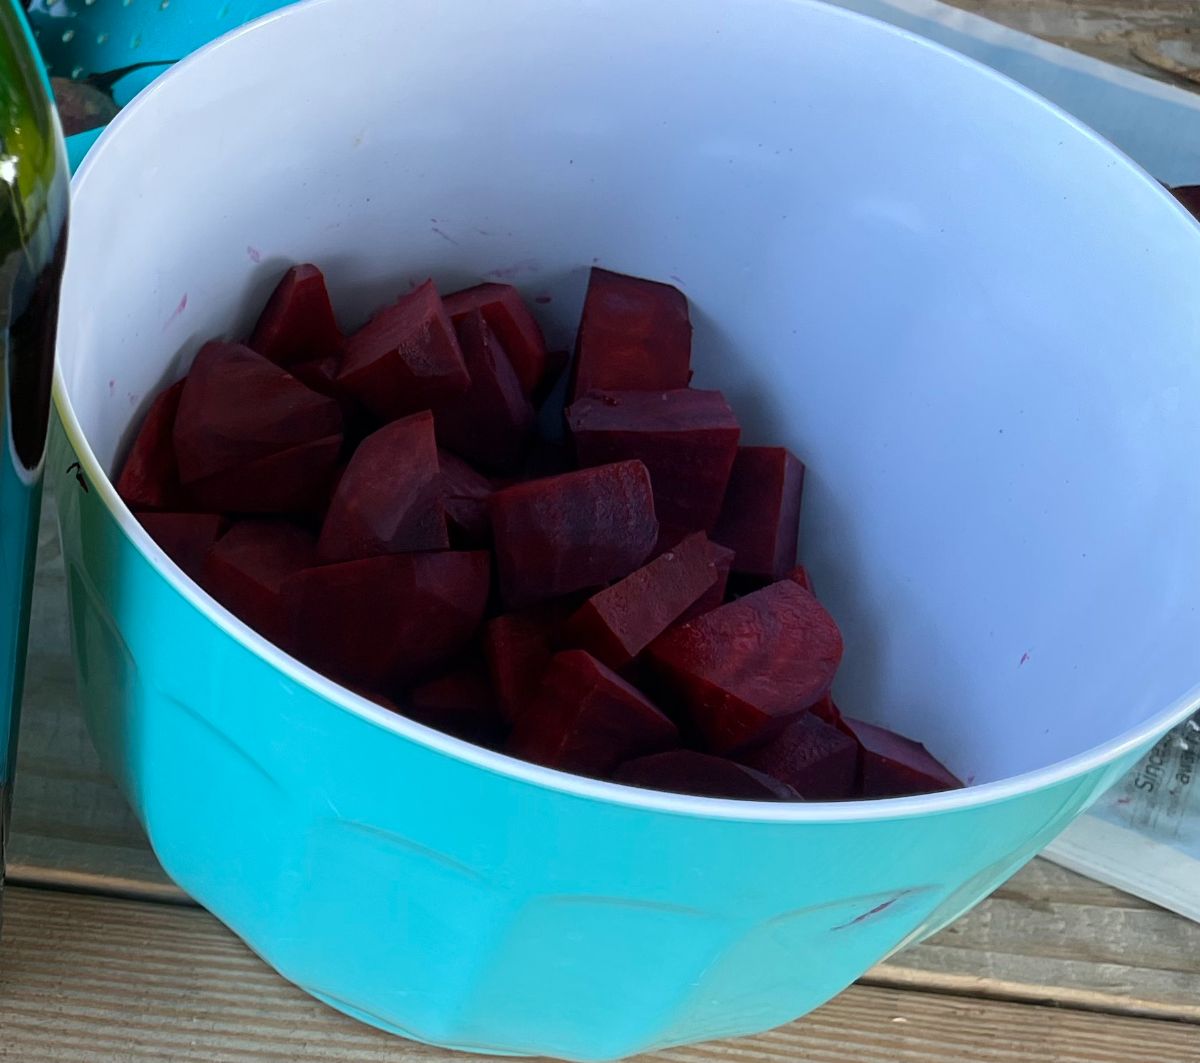 Beets cubed for roasting on a grill